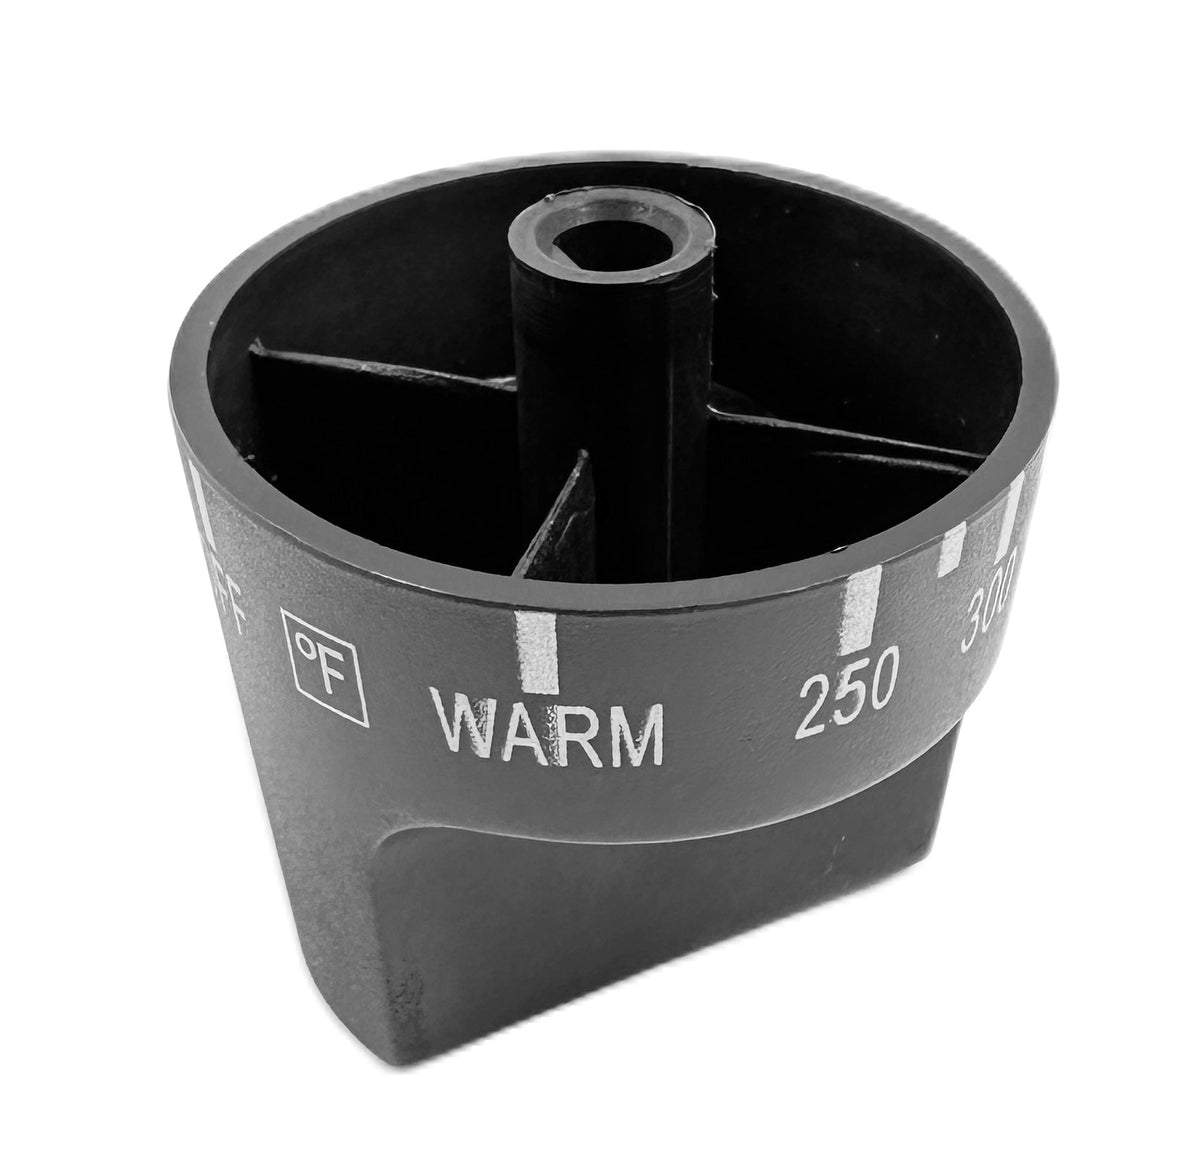 Oven knob 'Warm' for*** ! units sold before 2013 !*** for black 30' & 24' ranges (1 per unit)